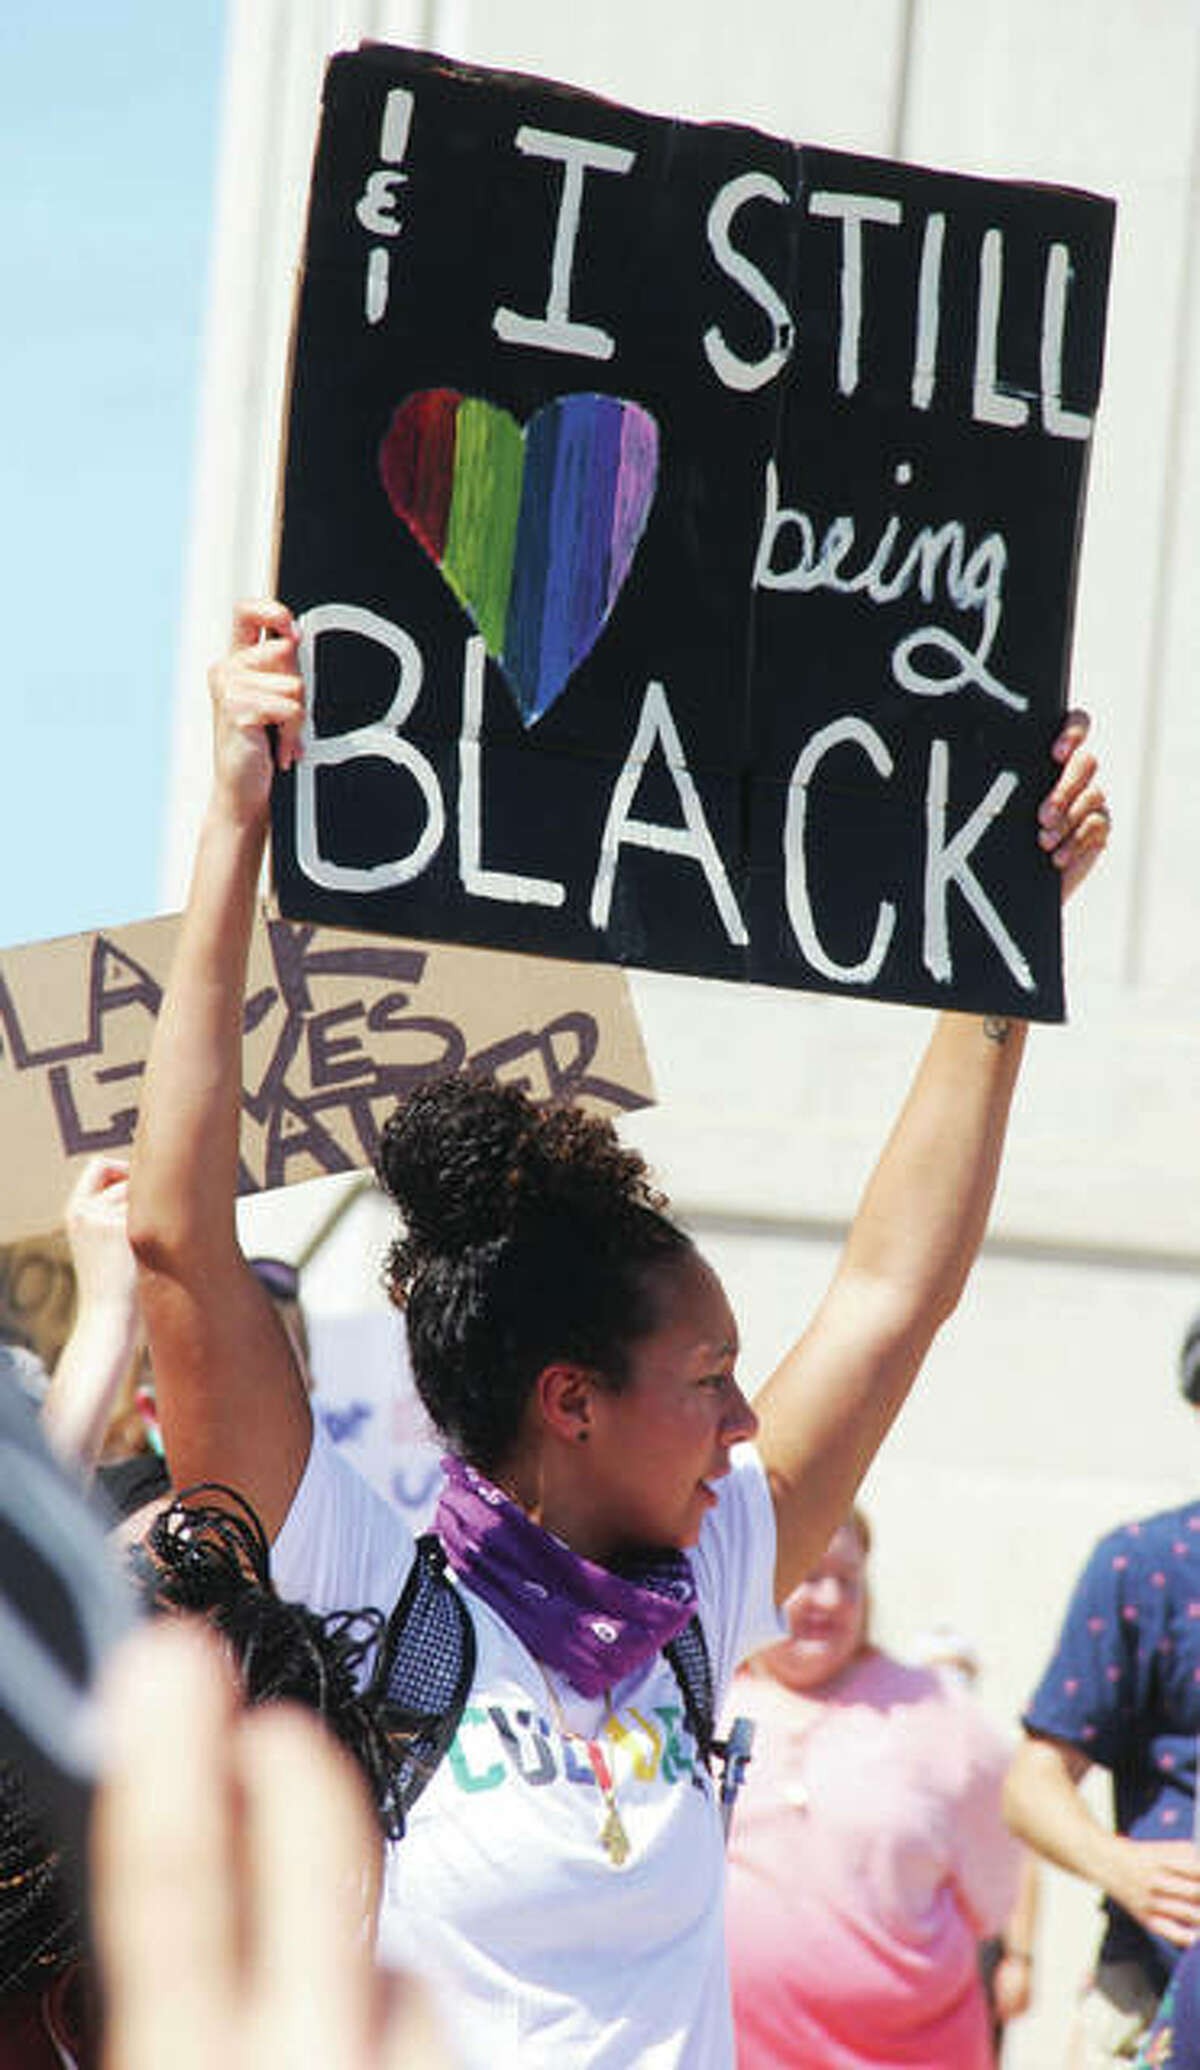 Destiny Bramblett, the assistant woman’s basketball coach at Southern Illinois University Edwardsville, carries a sign during a Black Lives Matter rally/protest Saturday morning in the plaza between the Madison County Courthouse and Administration Building. By 10:30 a.m. about 500 people had shown up for the event, the second held at the plaza.